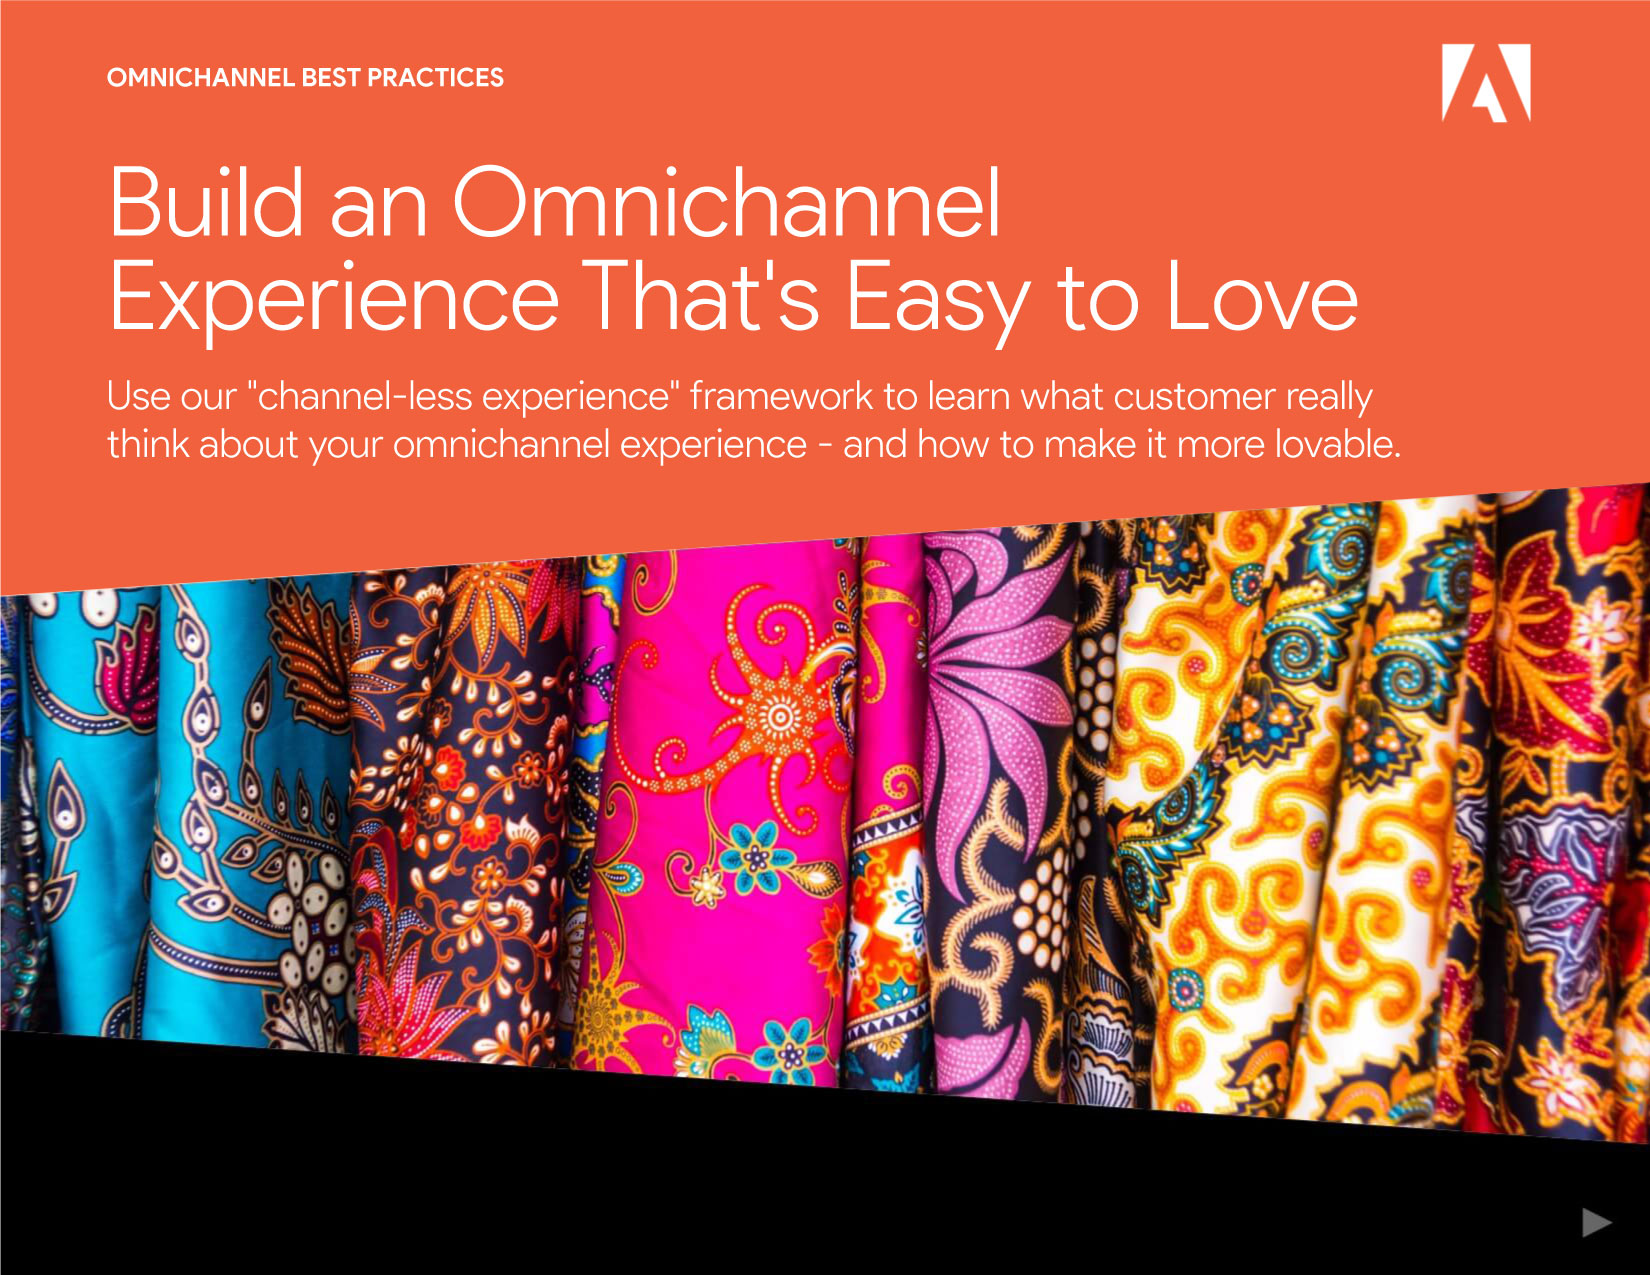 eBook: Build an Omnichannel Experience That’s Easy to Love0